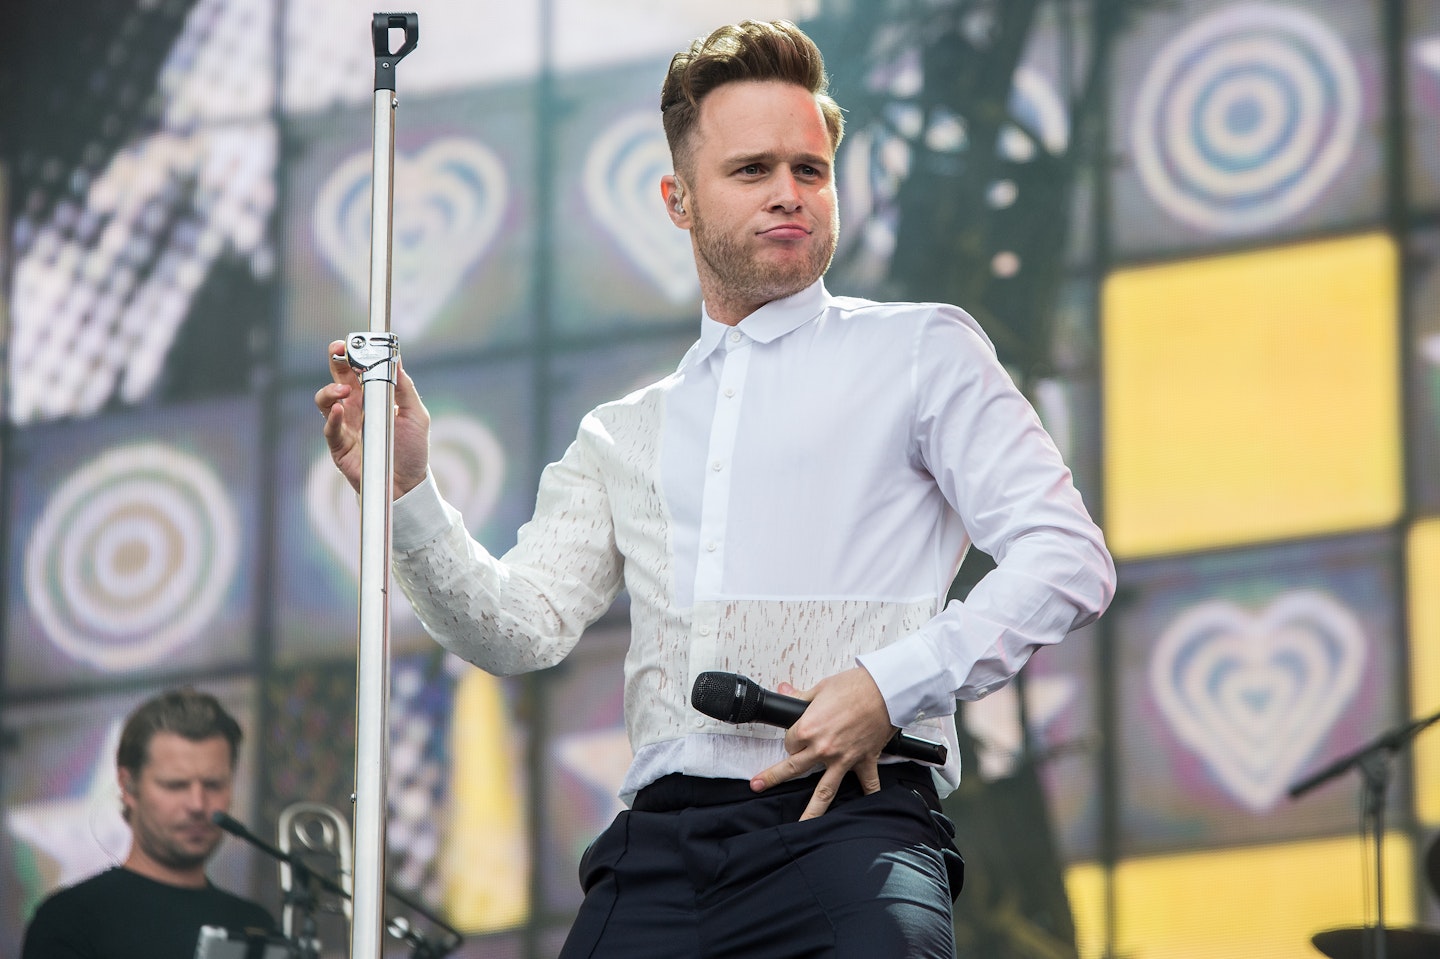 Olly Murs performing in London at British Summer Time Festival 2016